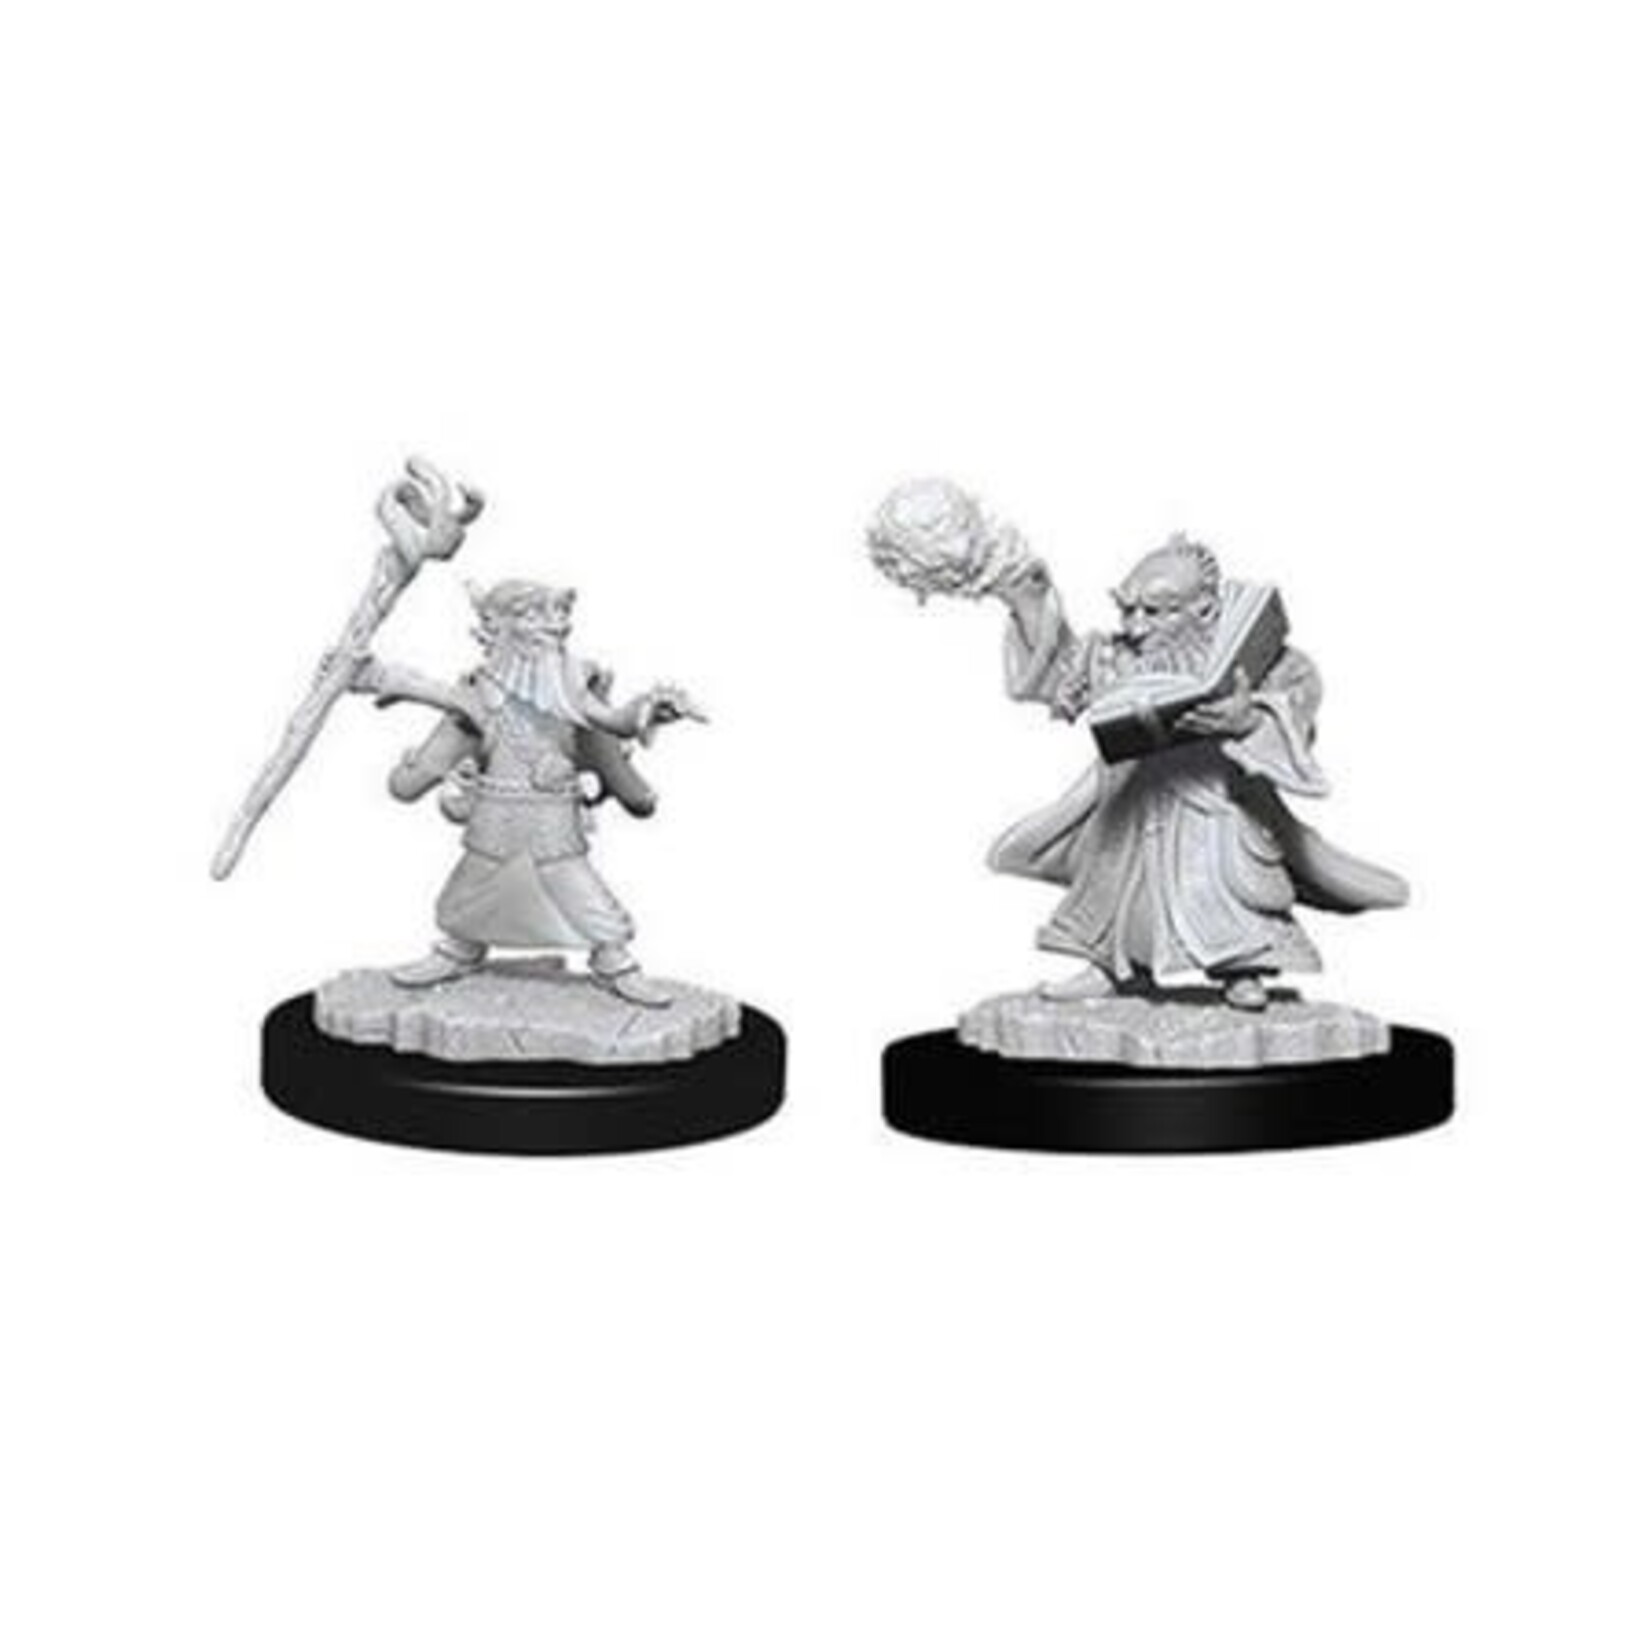 WizKids Dungeons and Dragons Nolzur's Marvelous Minis Gnome Male Wizard